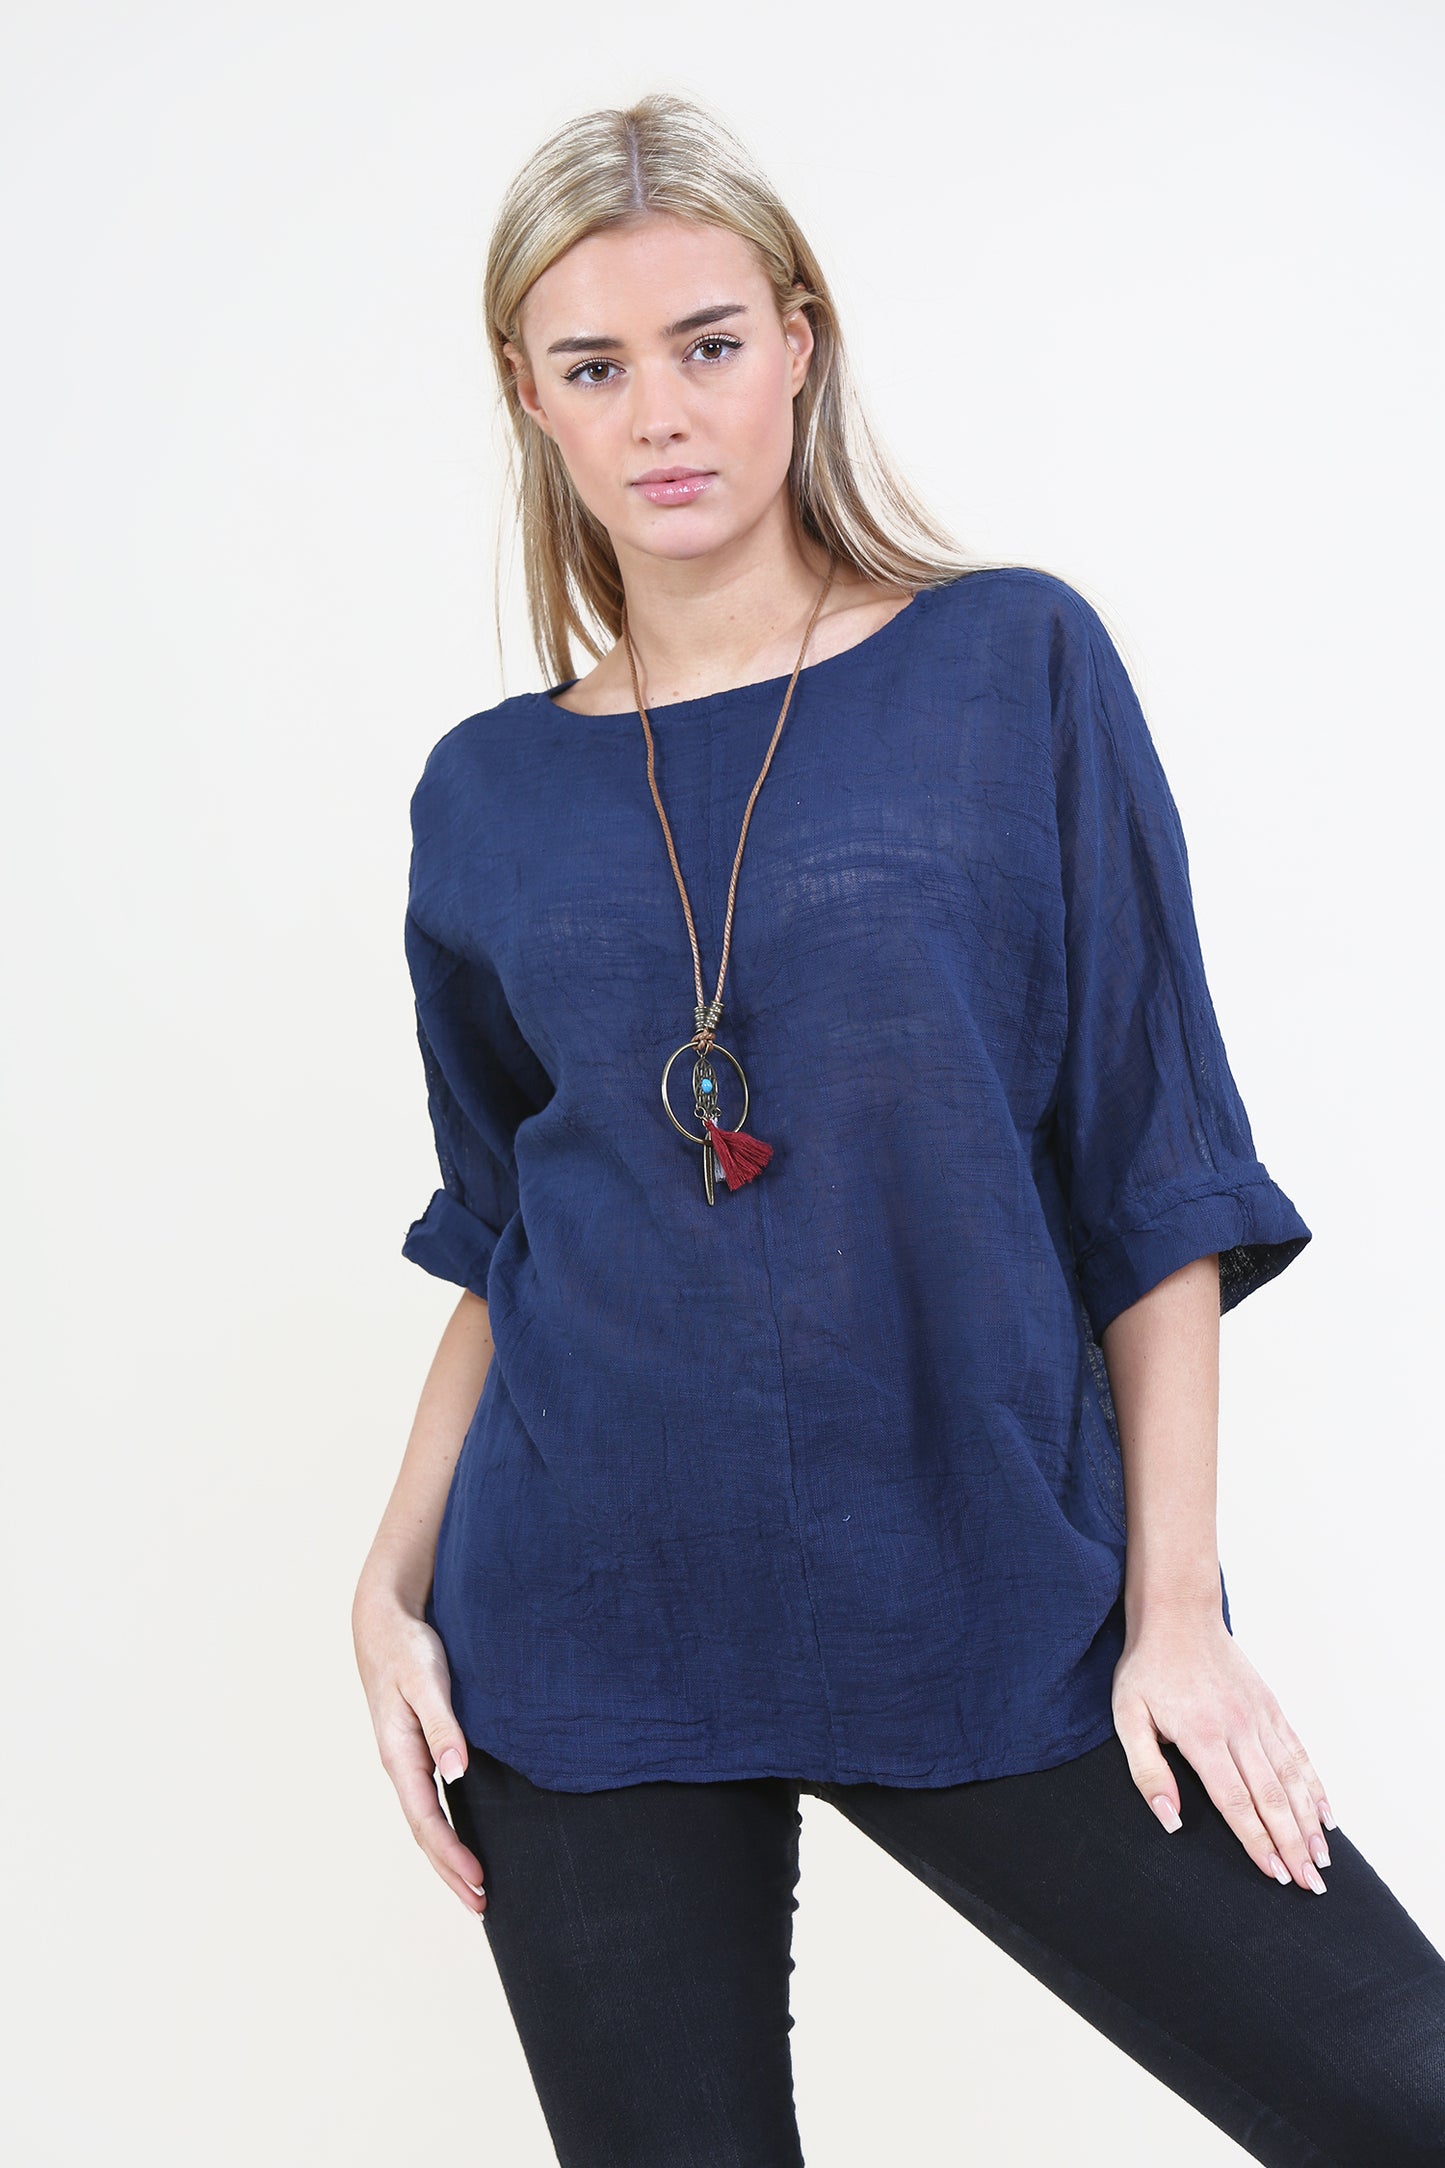 Women Navy Italian Cotton Top with Necklace